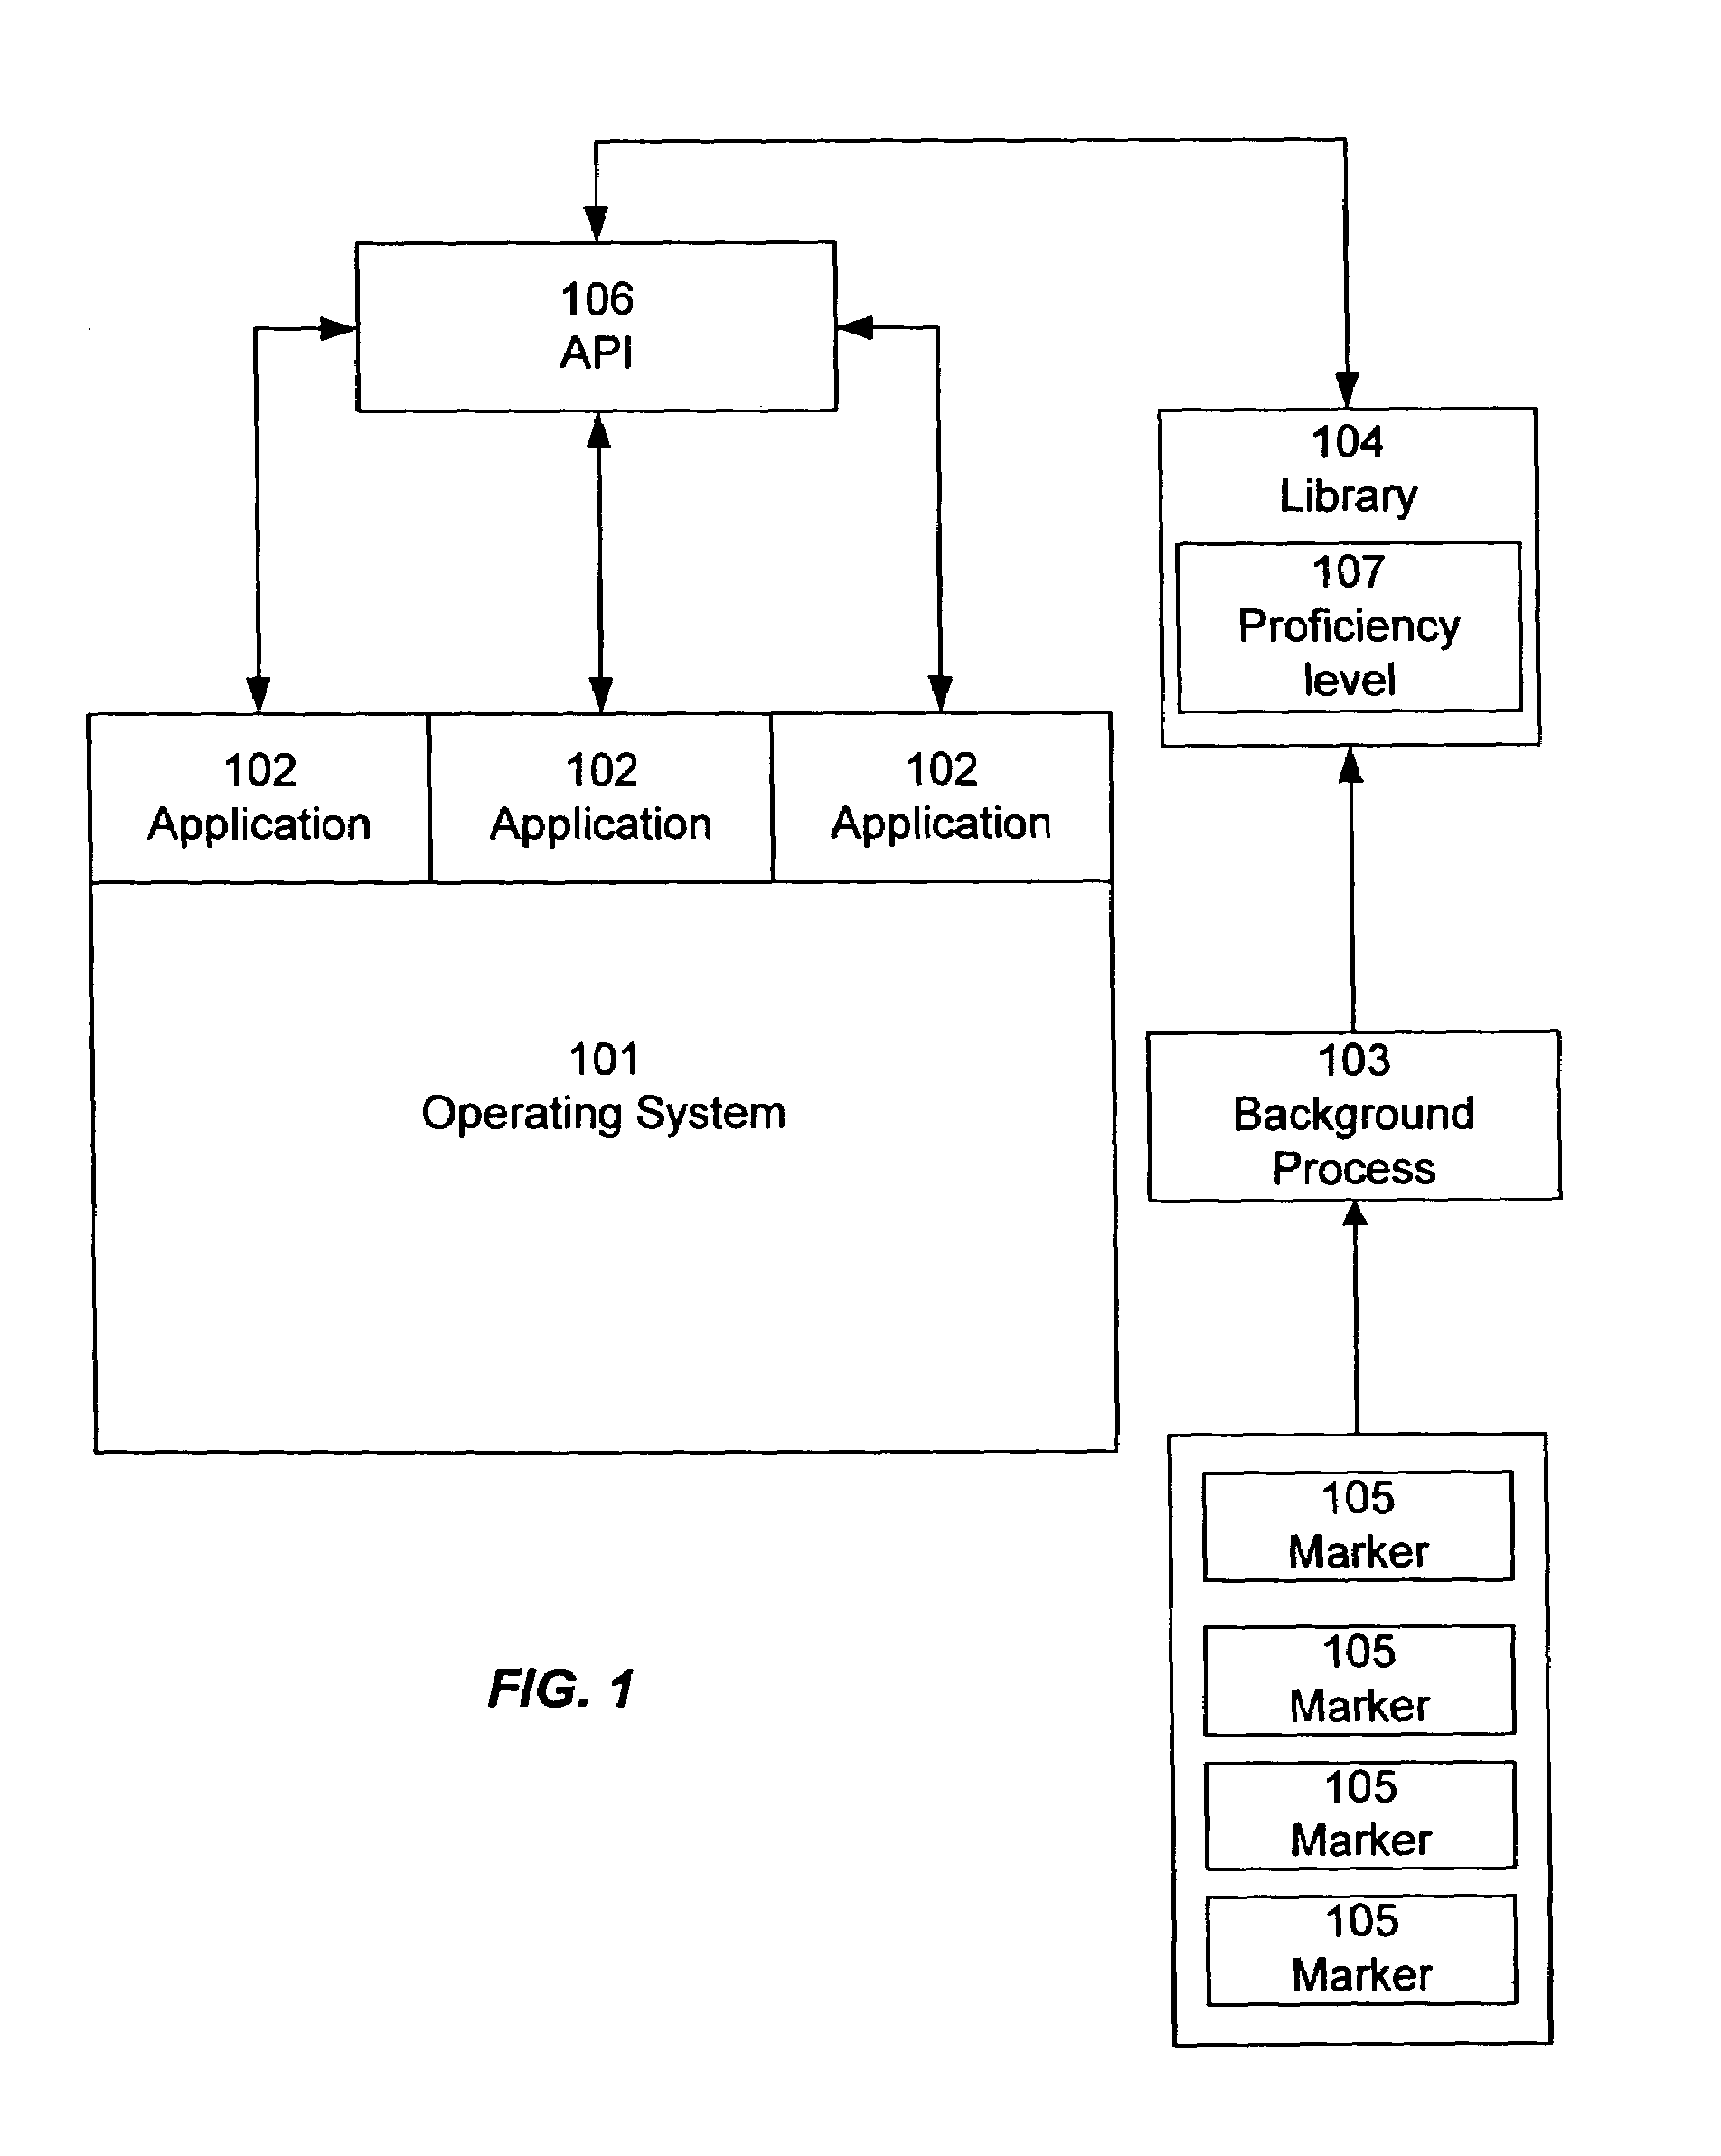 Automatic, dynamic user interface configuration